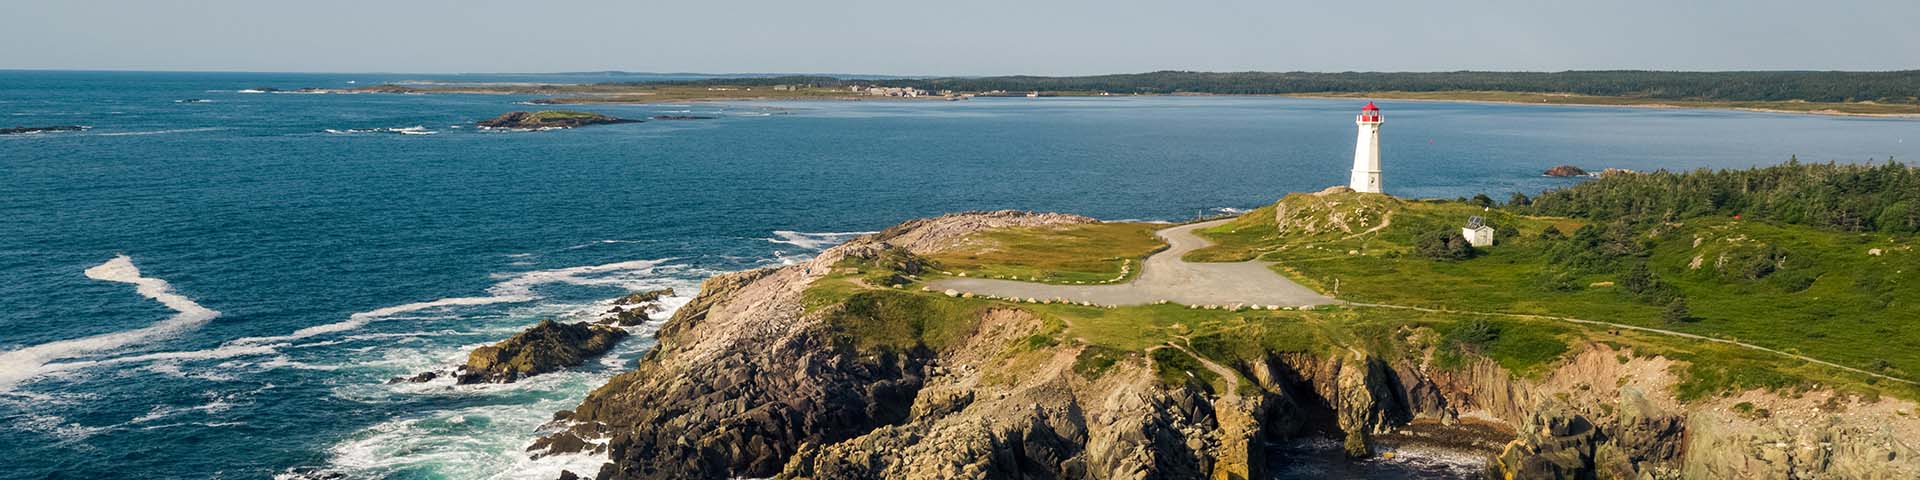 Aerial view of the Louisbourg lighthouse on the ocean with a view of the reconstructed town in the background